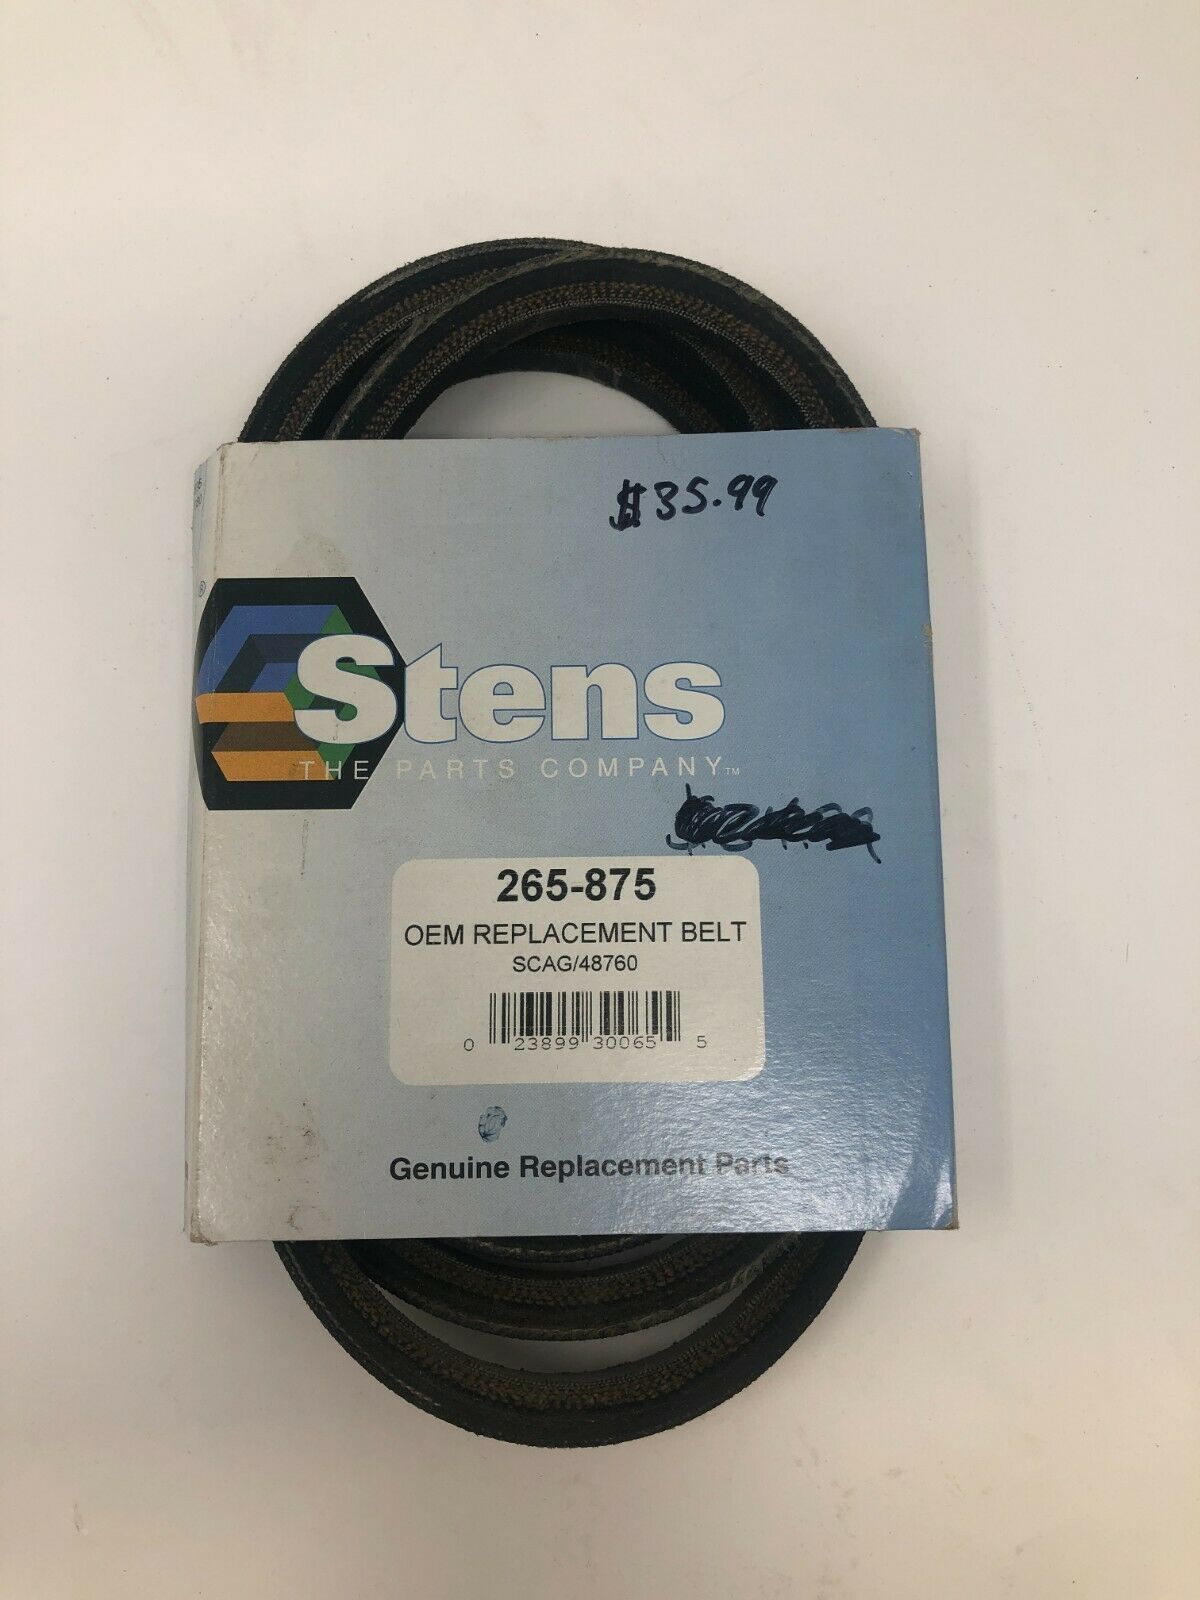 Primary image for Stens OEM Replacement Belt 265-875 (832945475395)